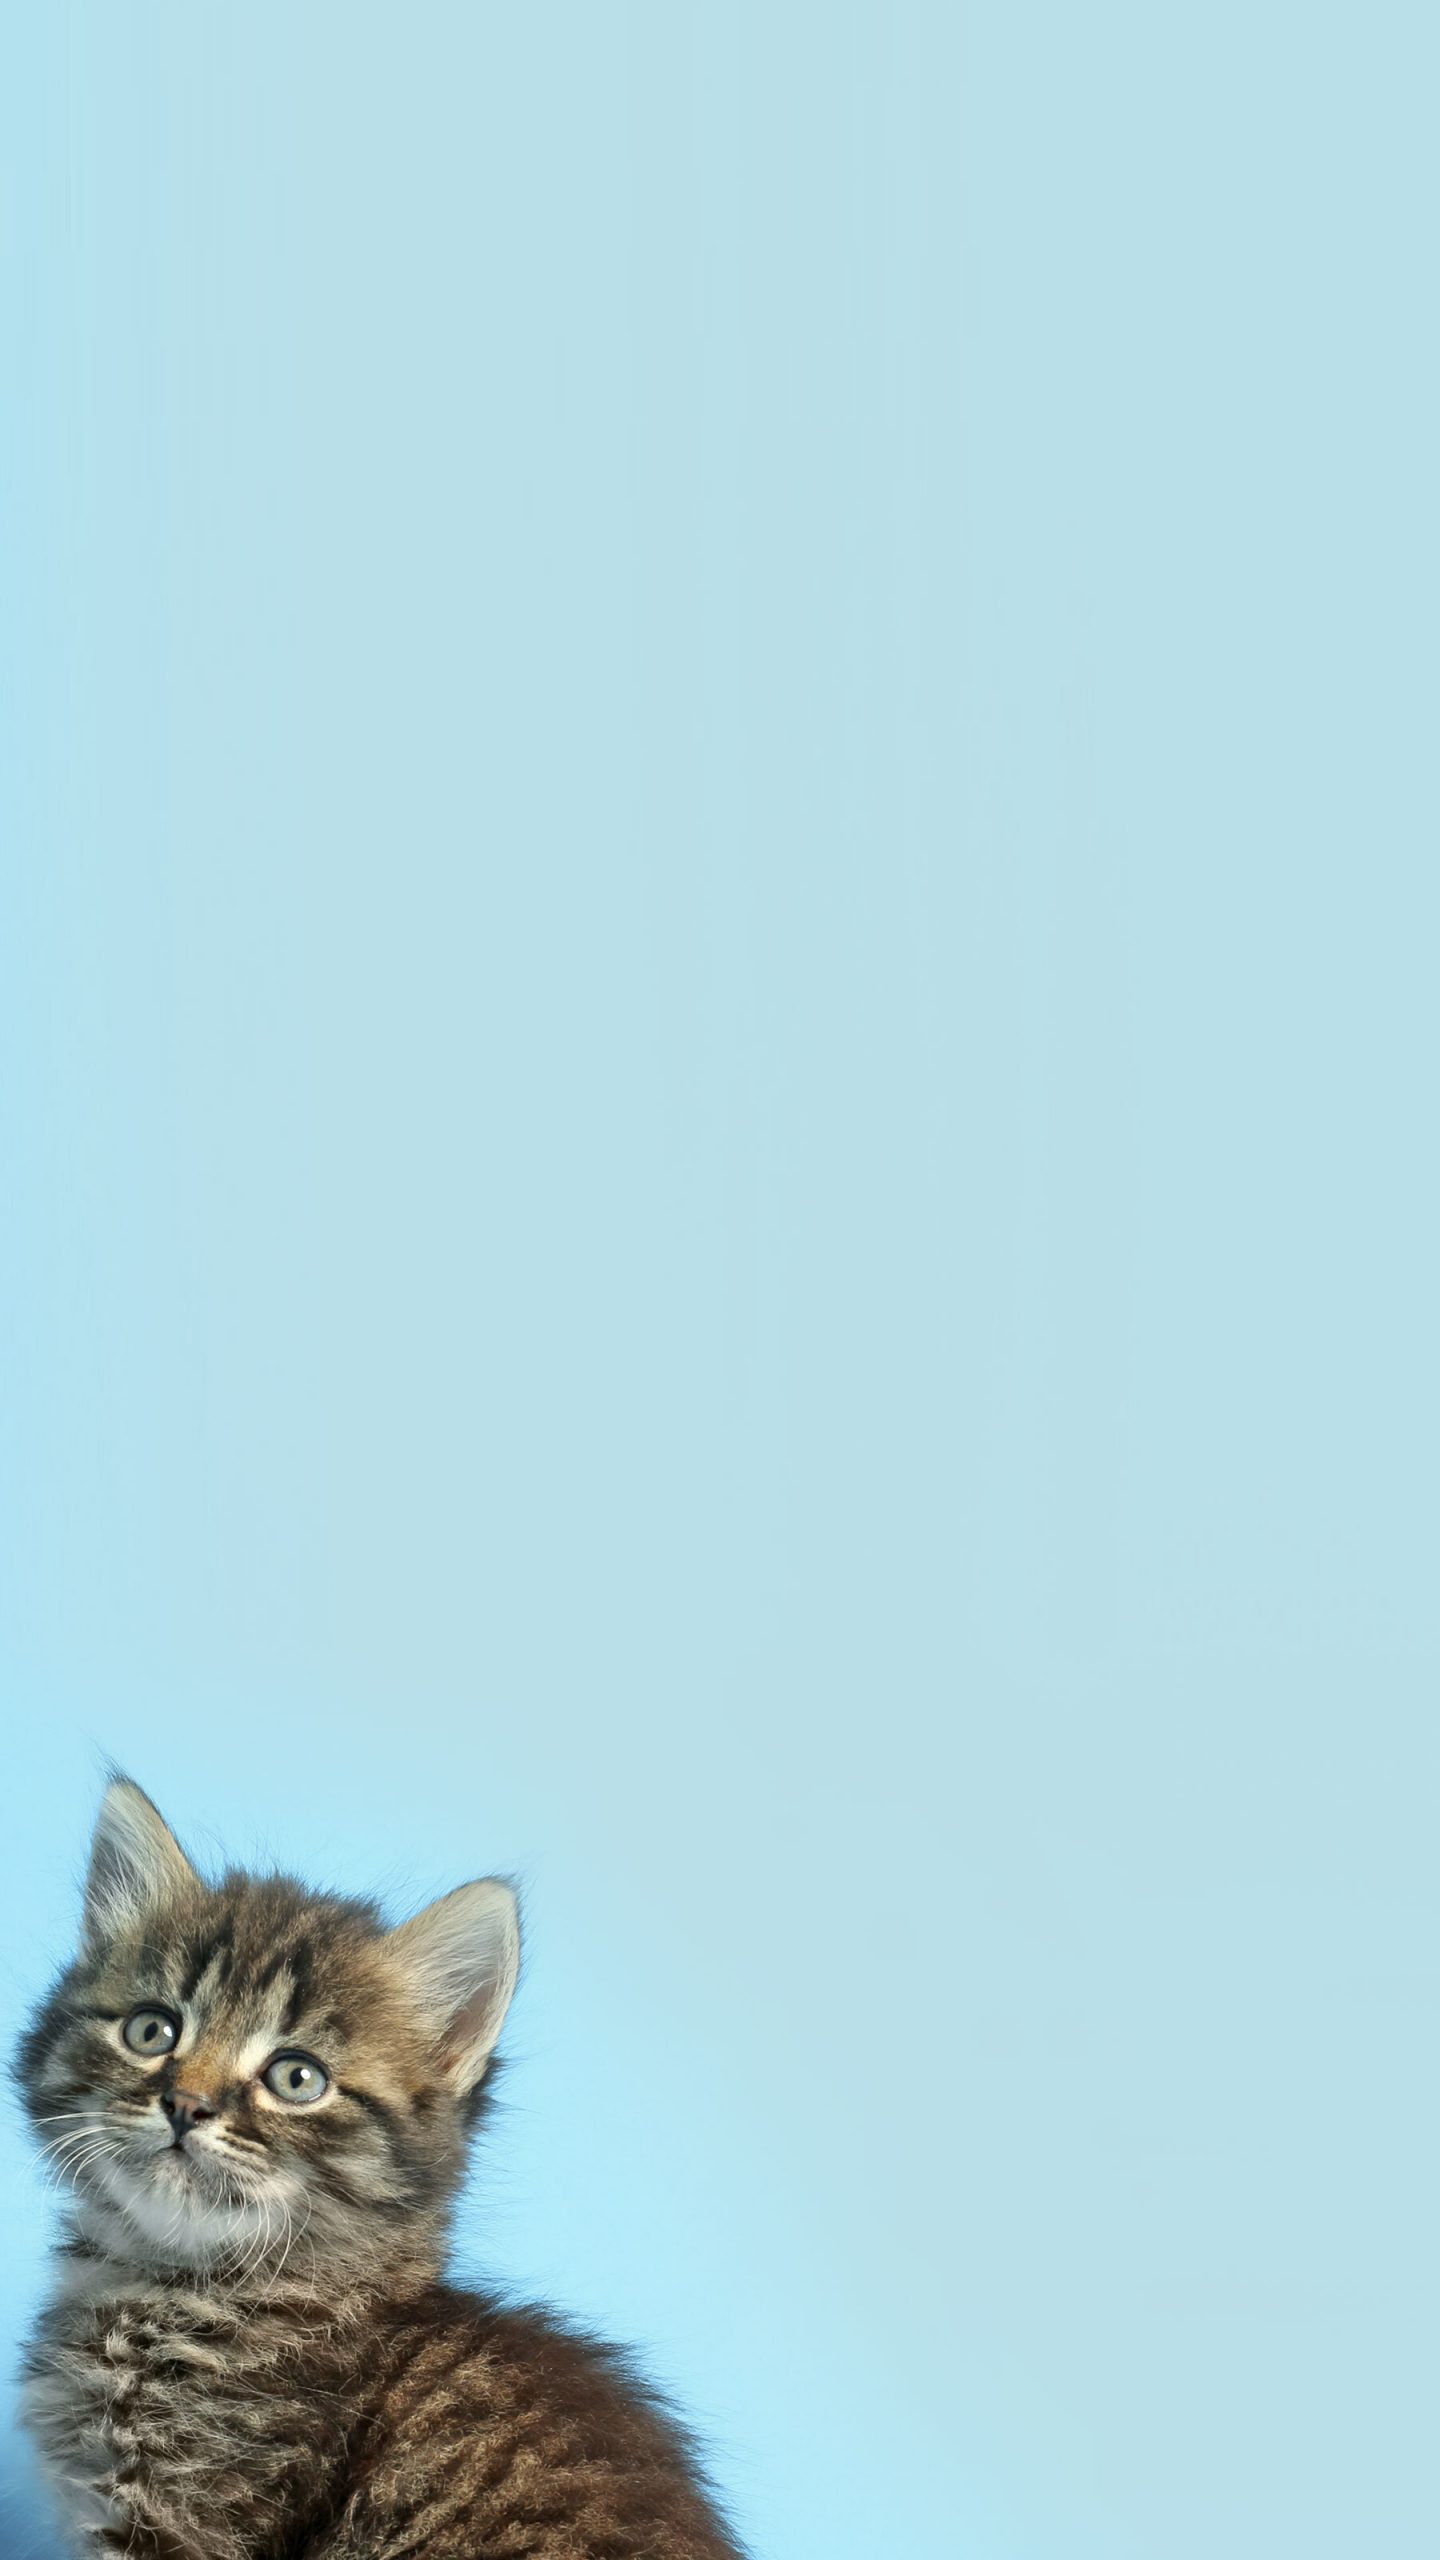 Black striped cat with blue background